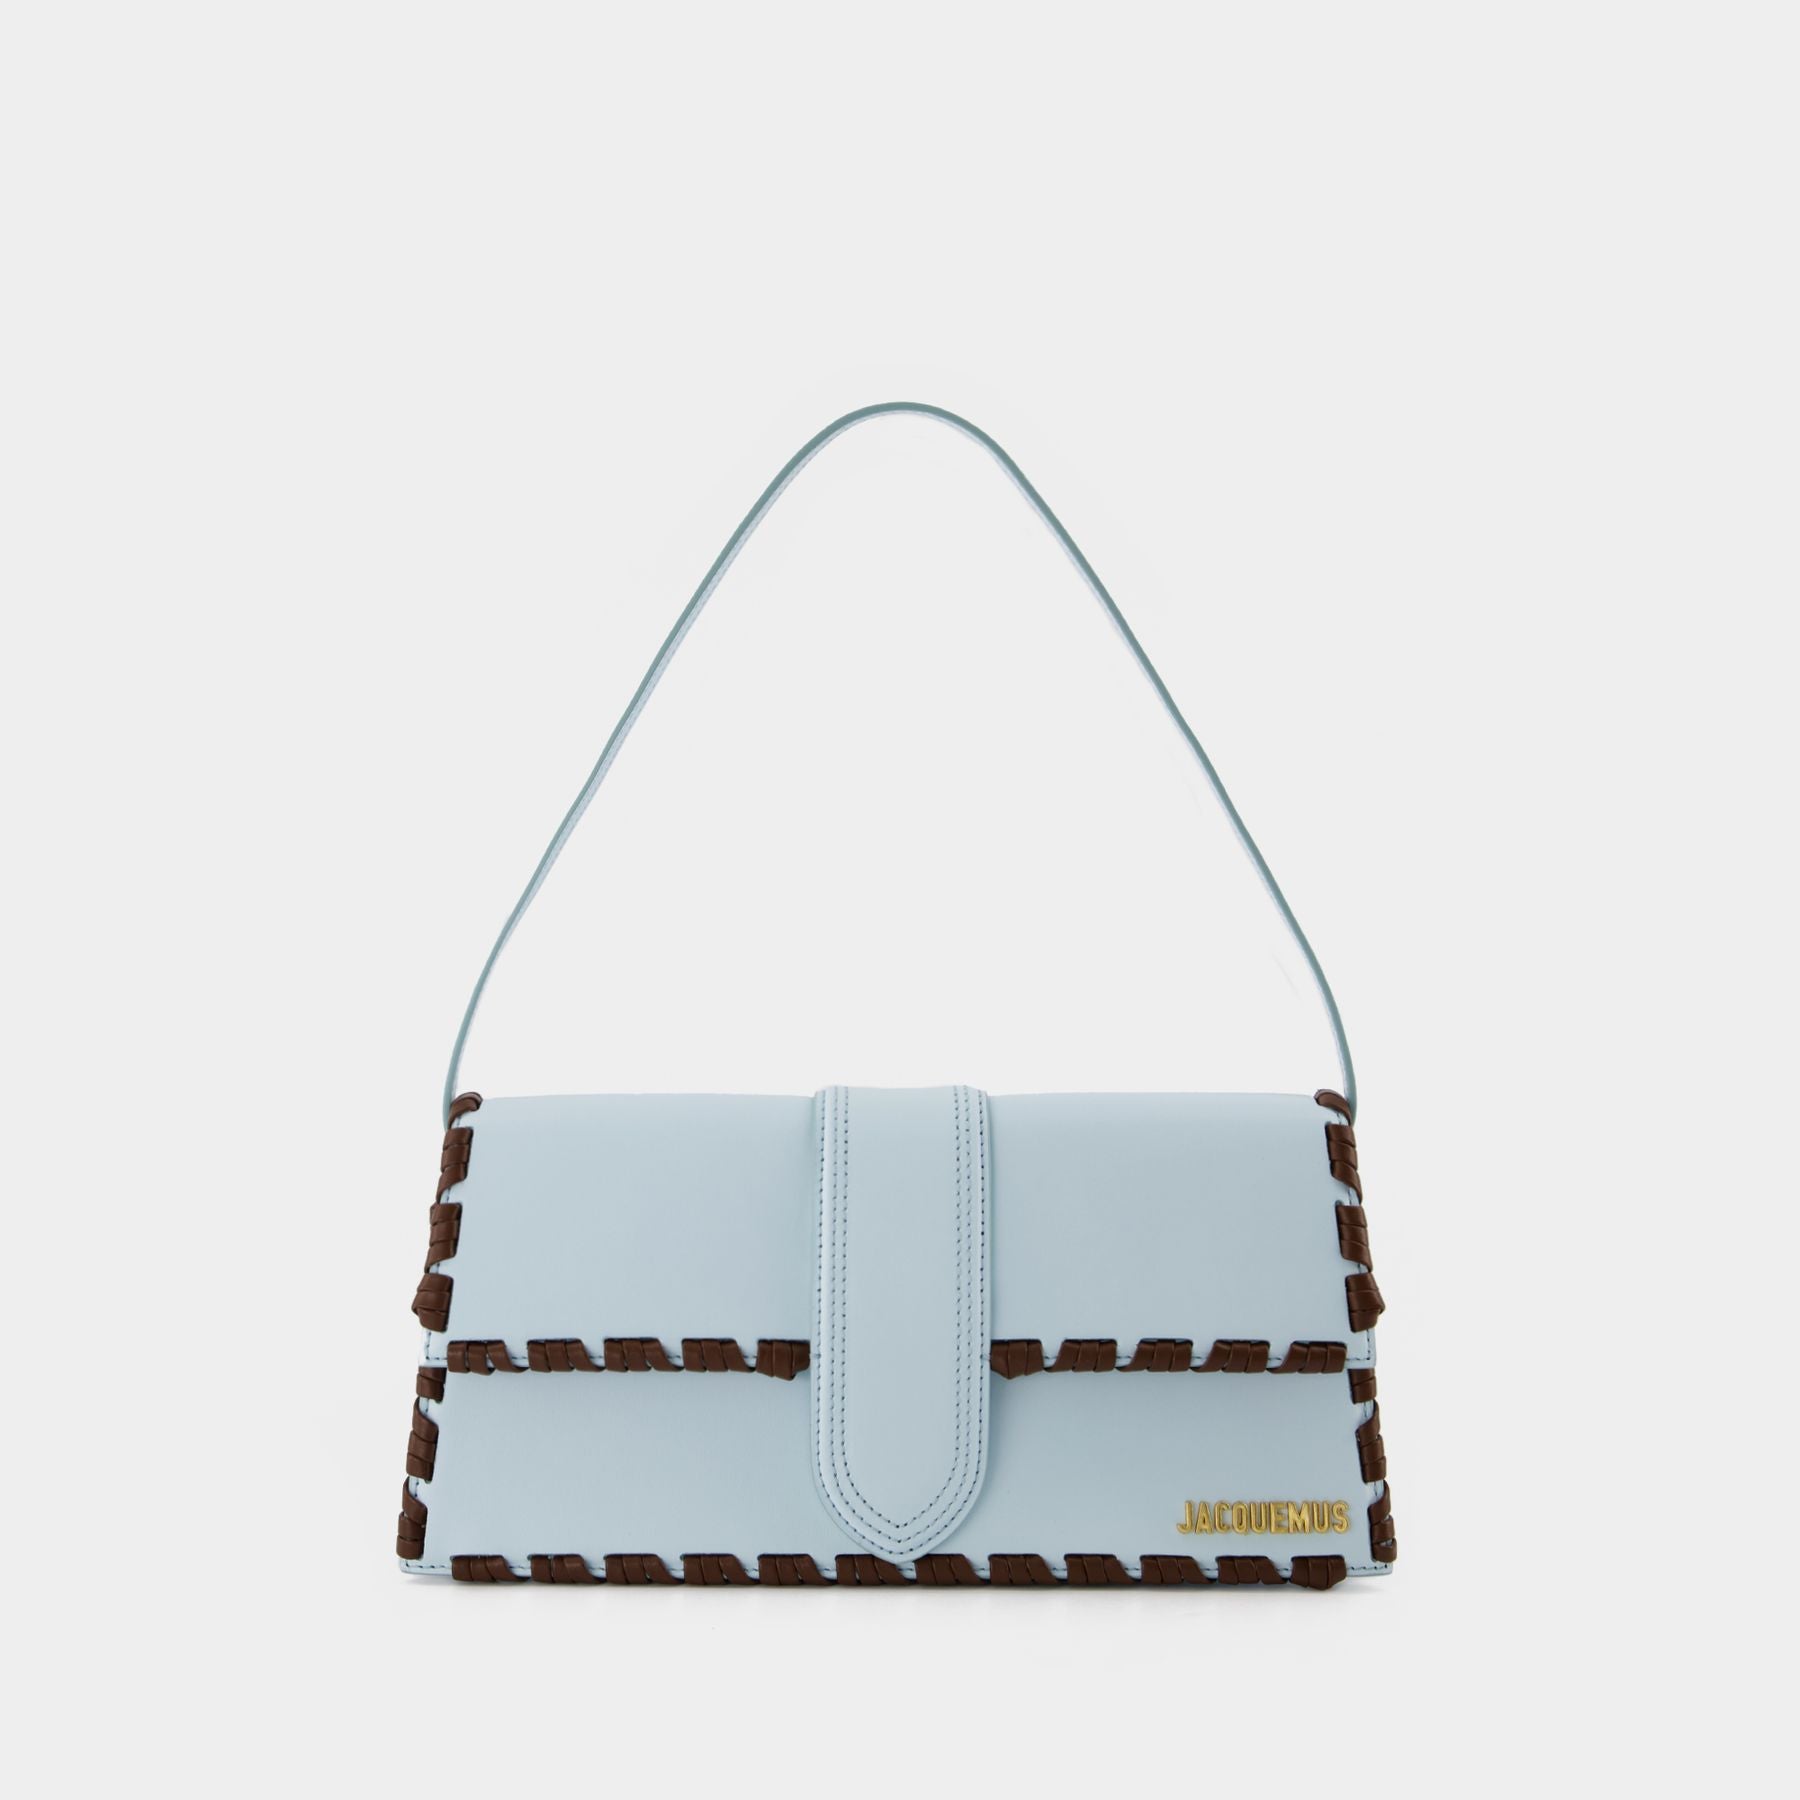 Jacquemus Leather Le Bambino Long Shoulder Bag - White - One Size